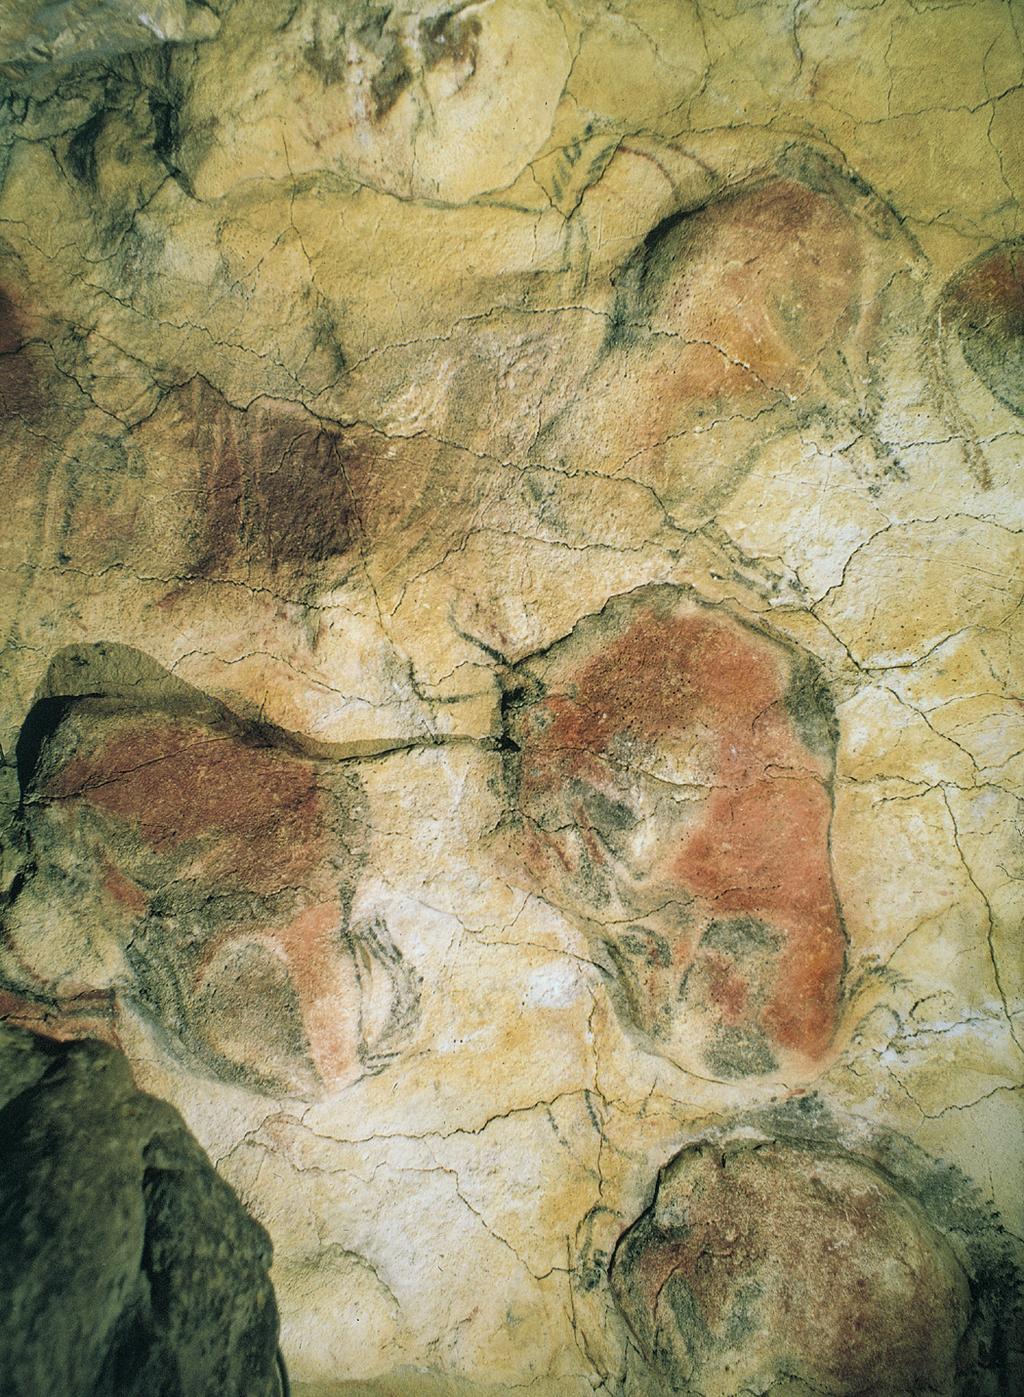 Paleolithic Art Figure 1-9 Bison, detail of a painted ceiling in the Altamira cave, Santander, Spain, ca. 12,000 11,000 BCE. Each bison approx. 5 long.